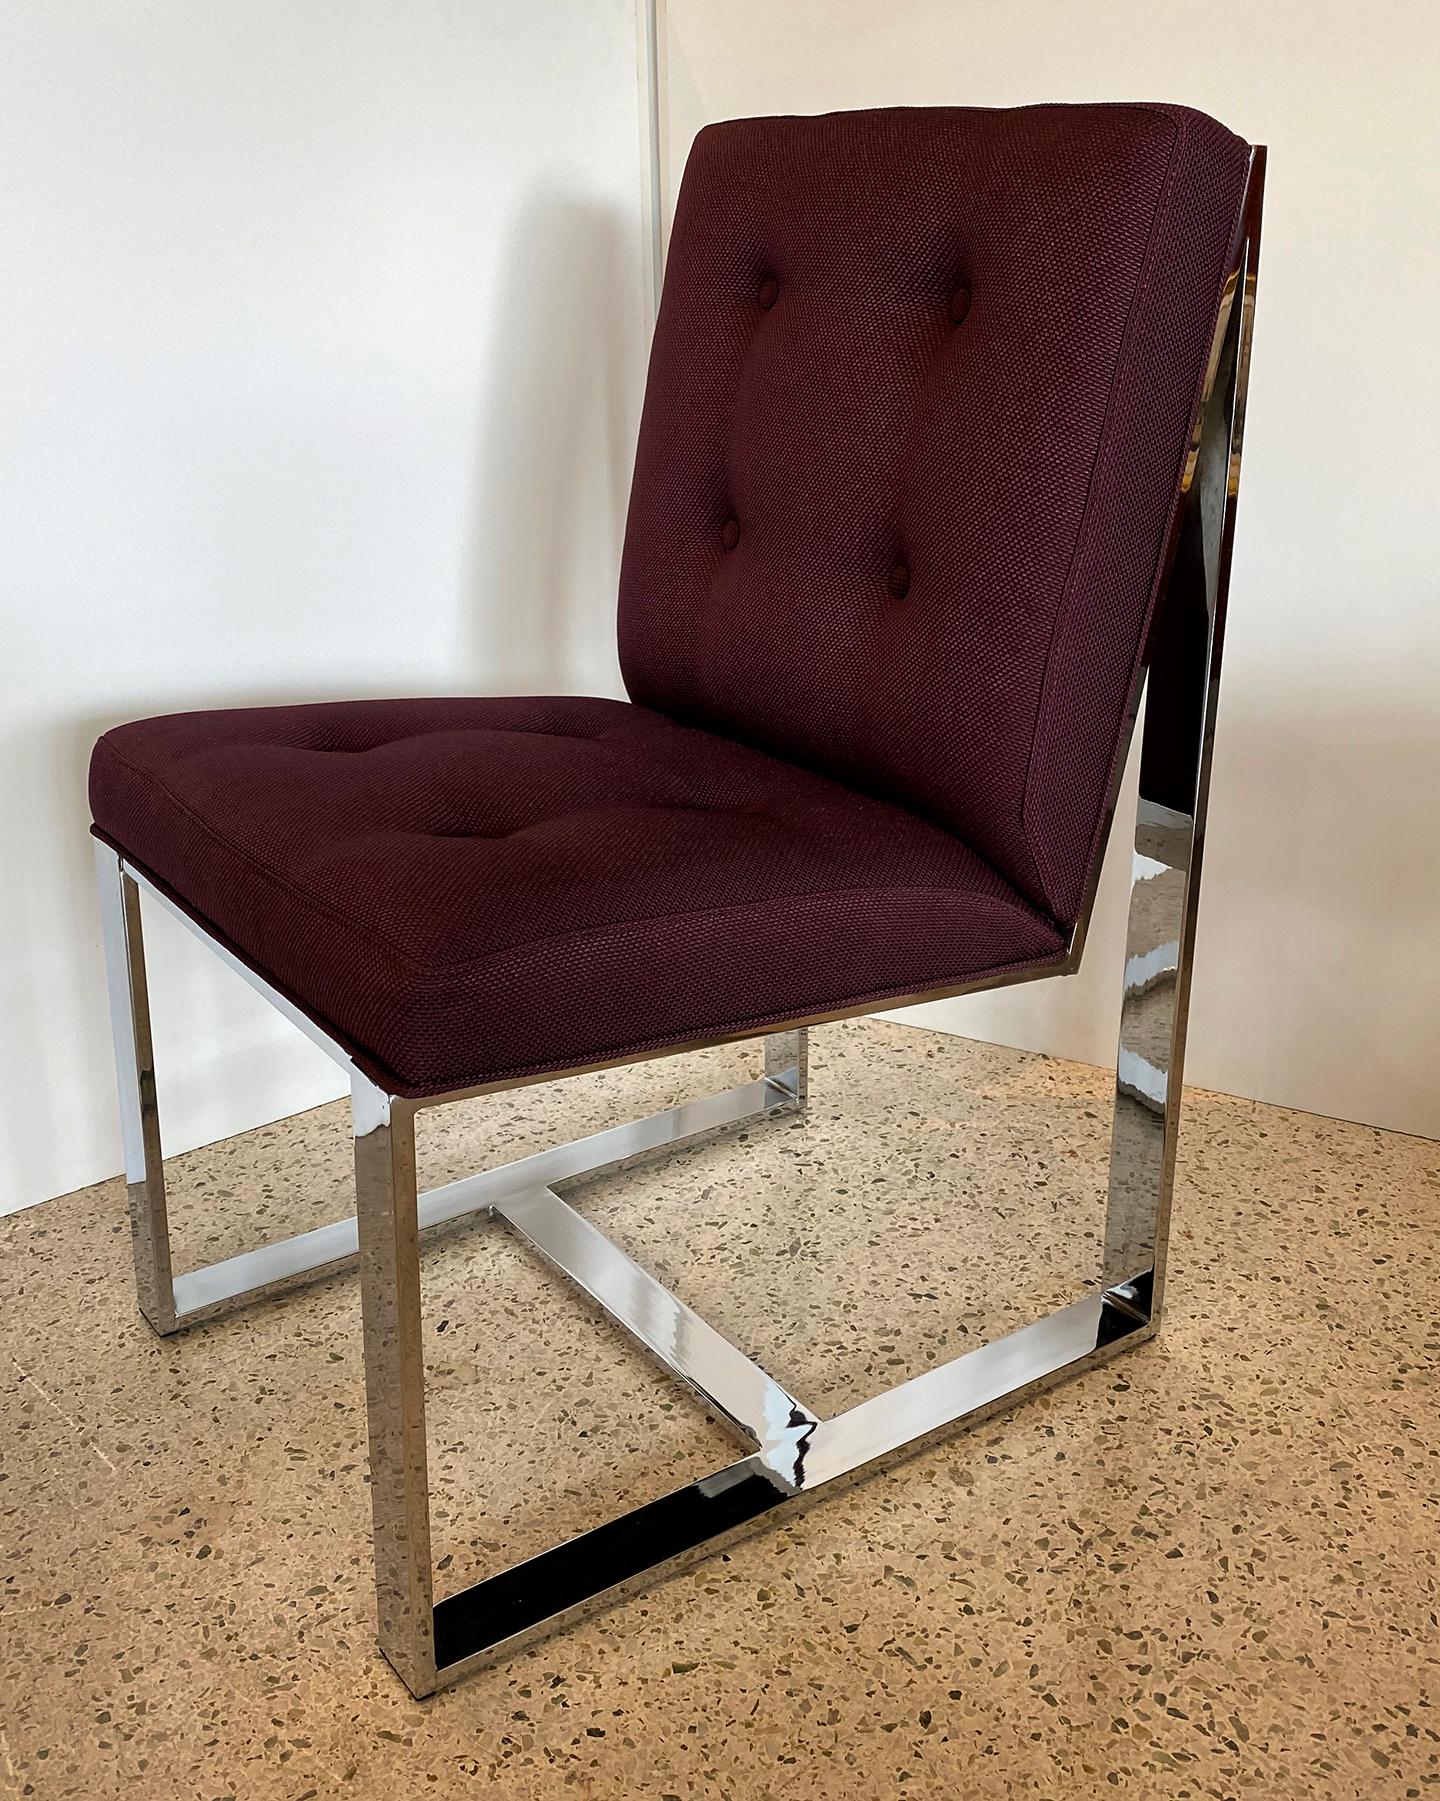 10 American Polished Stainless & Upholstered Dining Chairs, Milo Baughman In Good Condition For Sale In Hollywood, FL